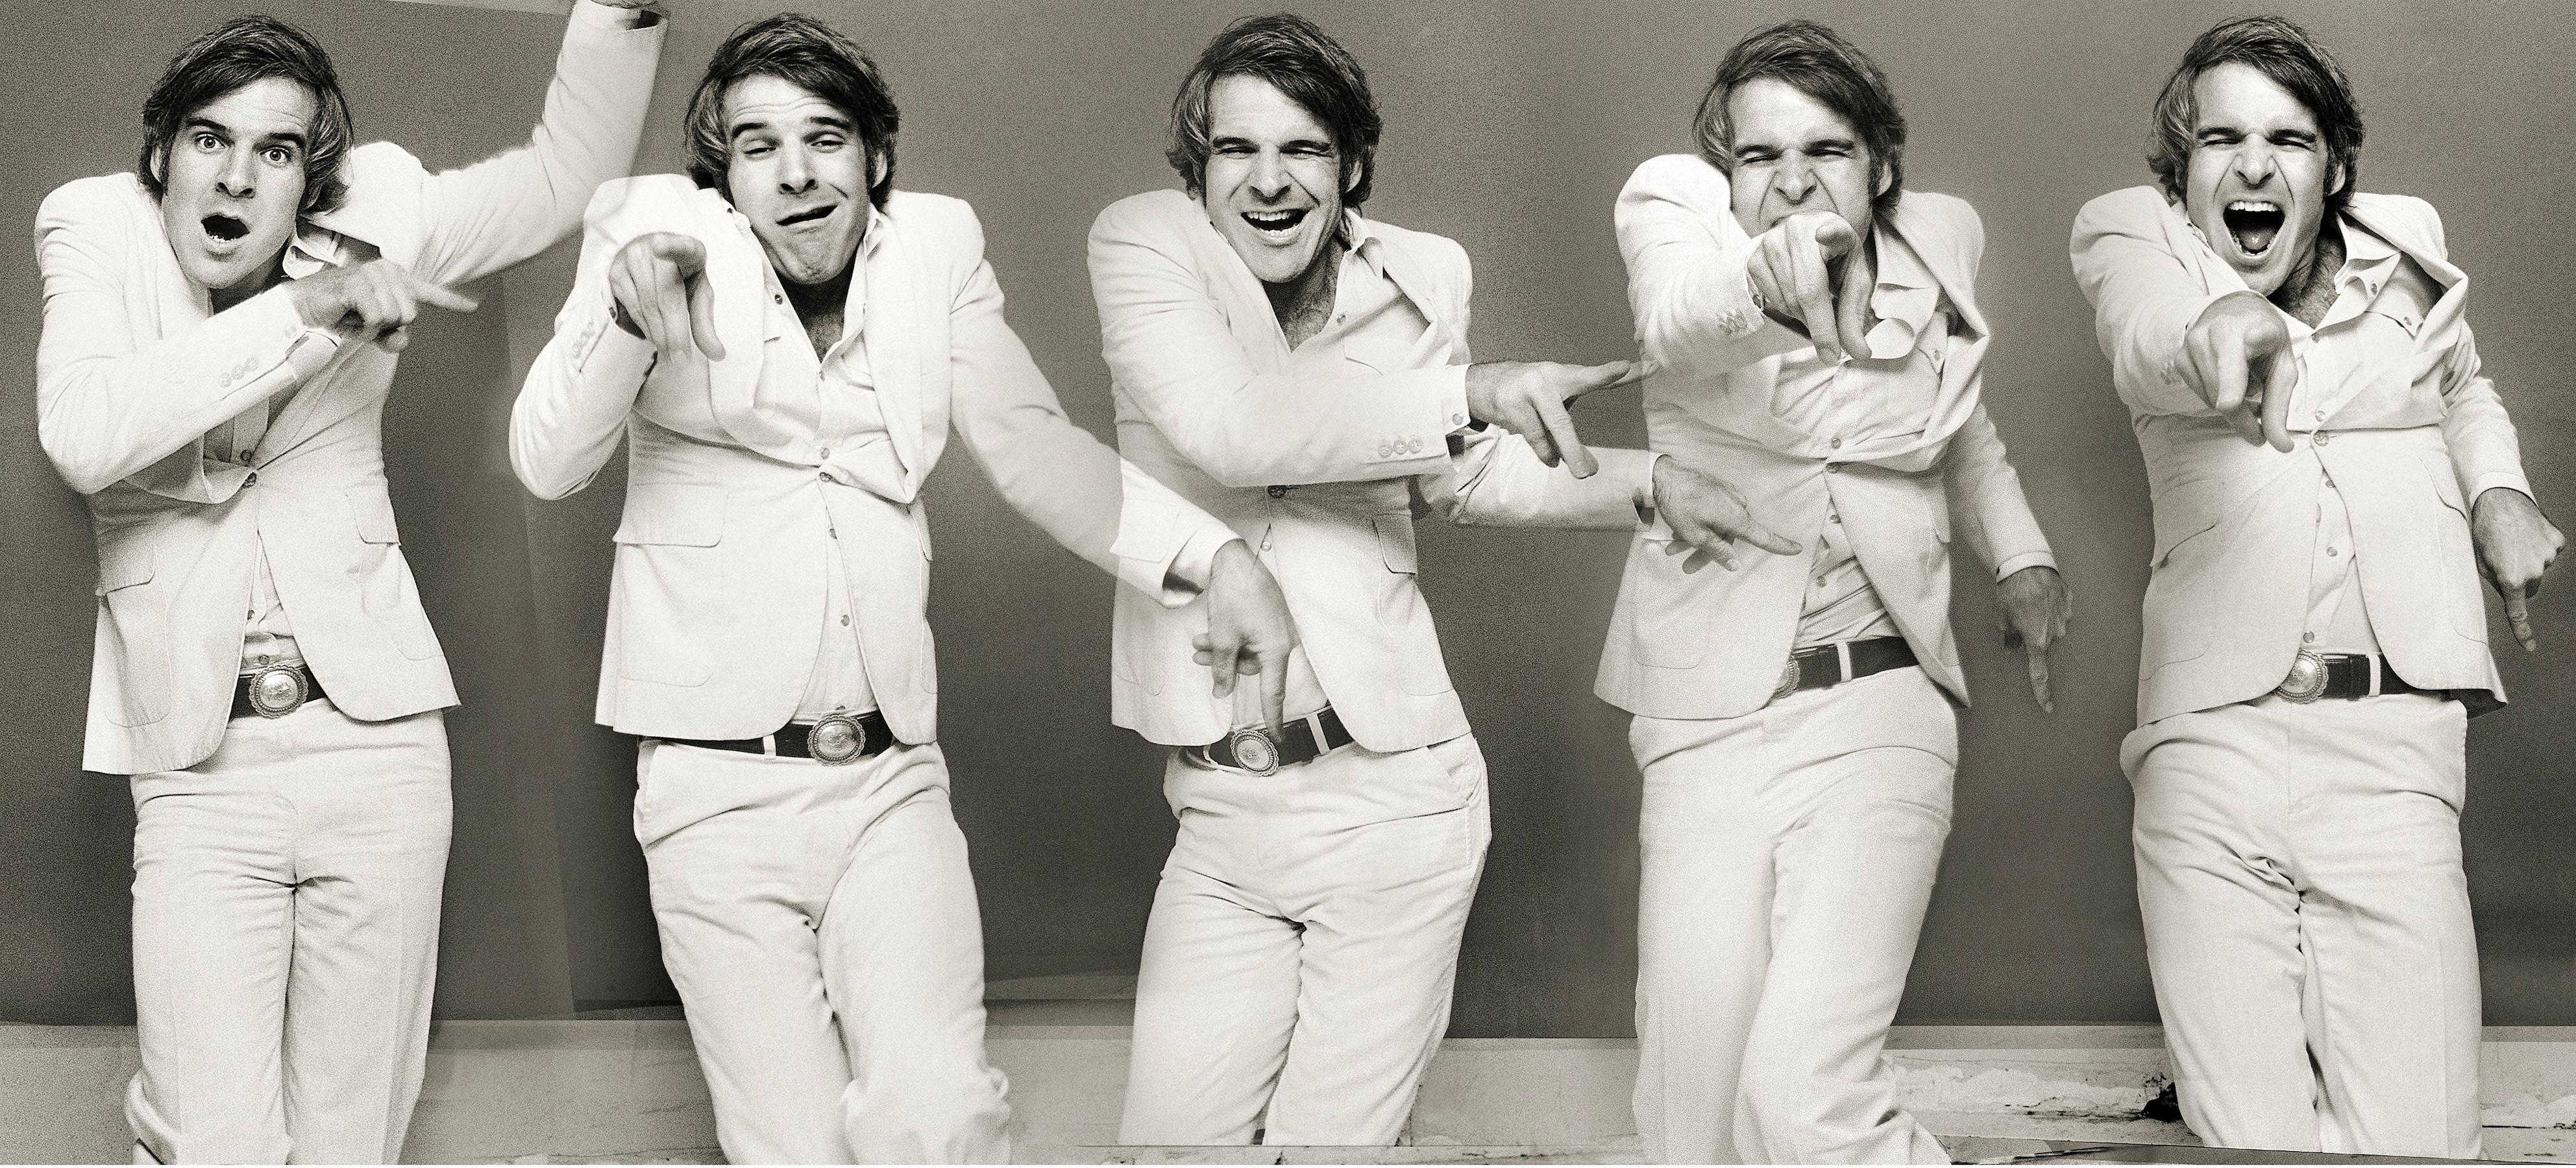 Black and White Photograph Norman Seeff - Steve Martin, « Let's Get Small Sequence », 1974